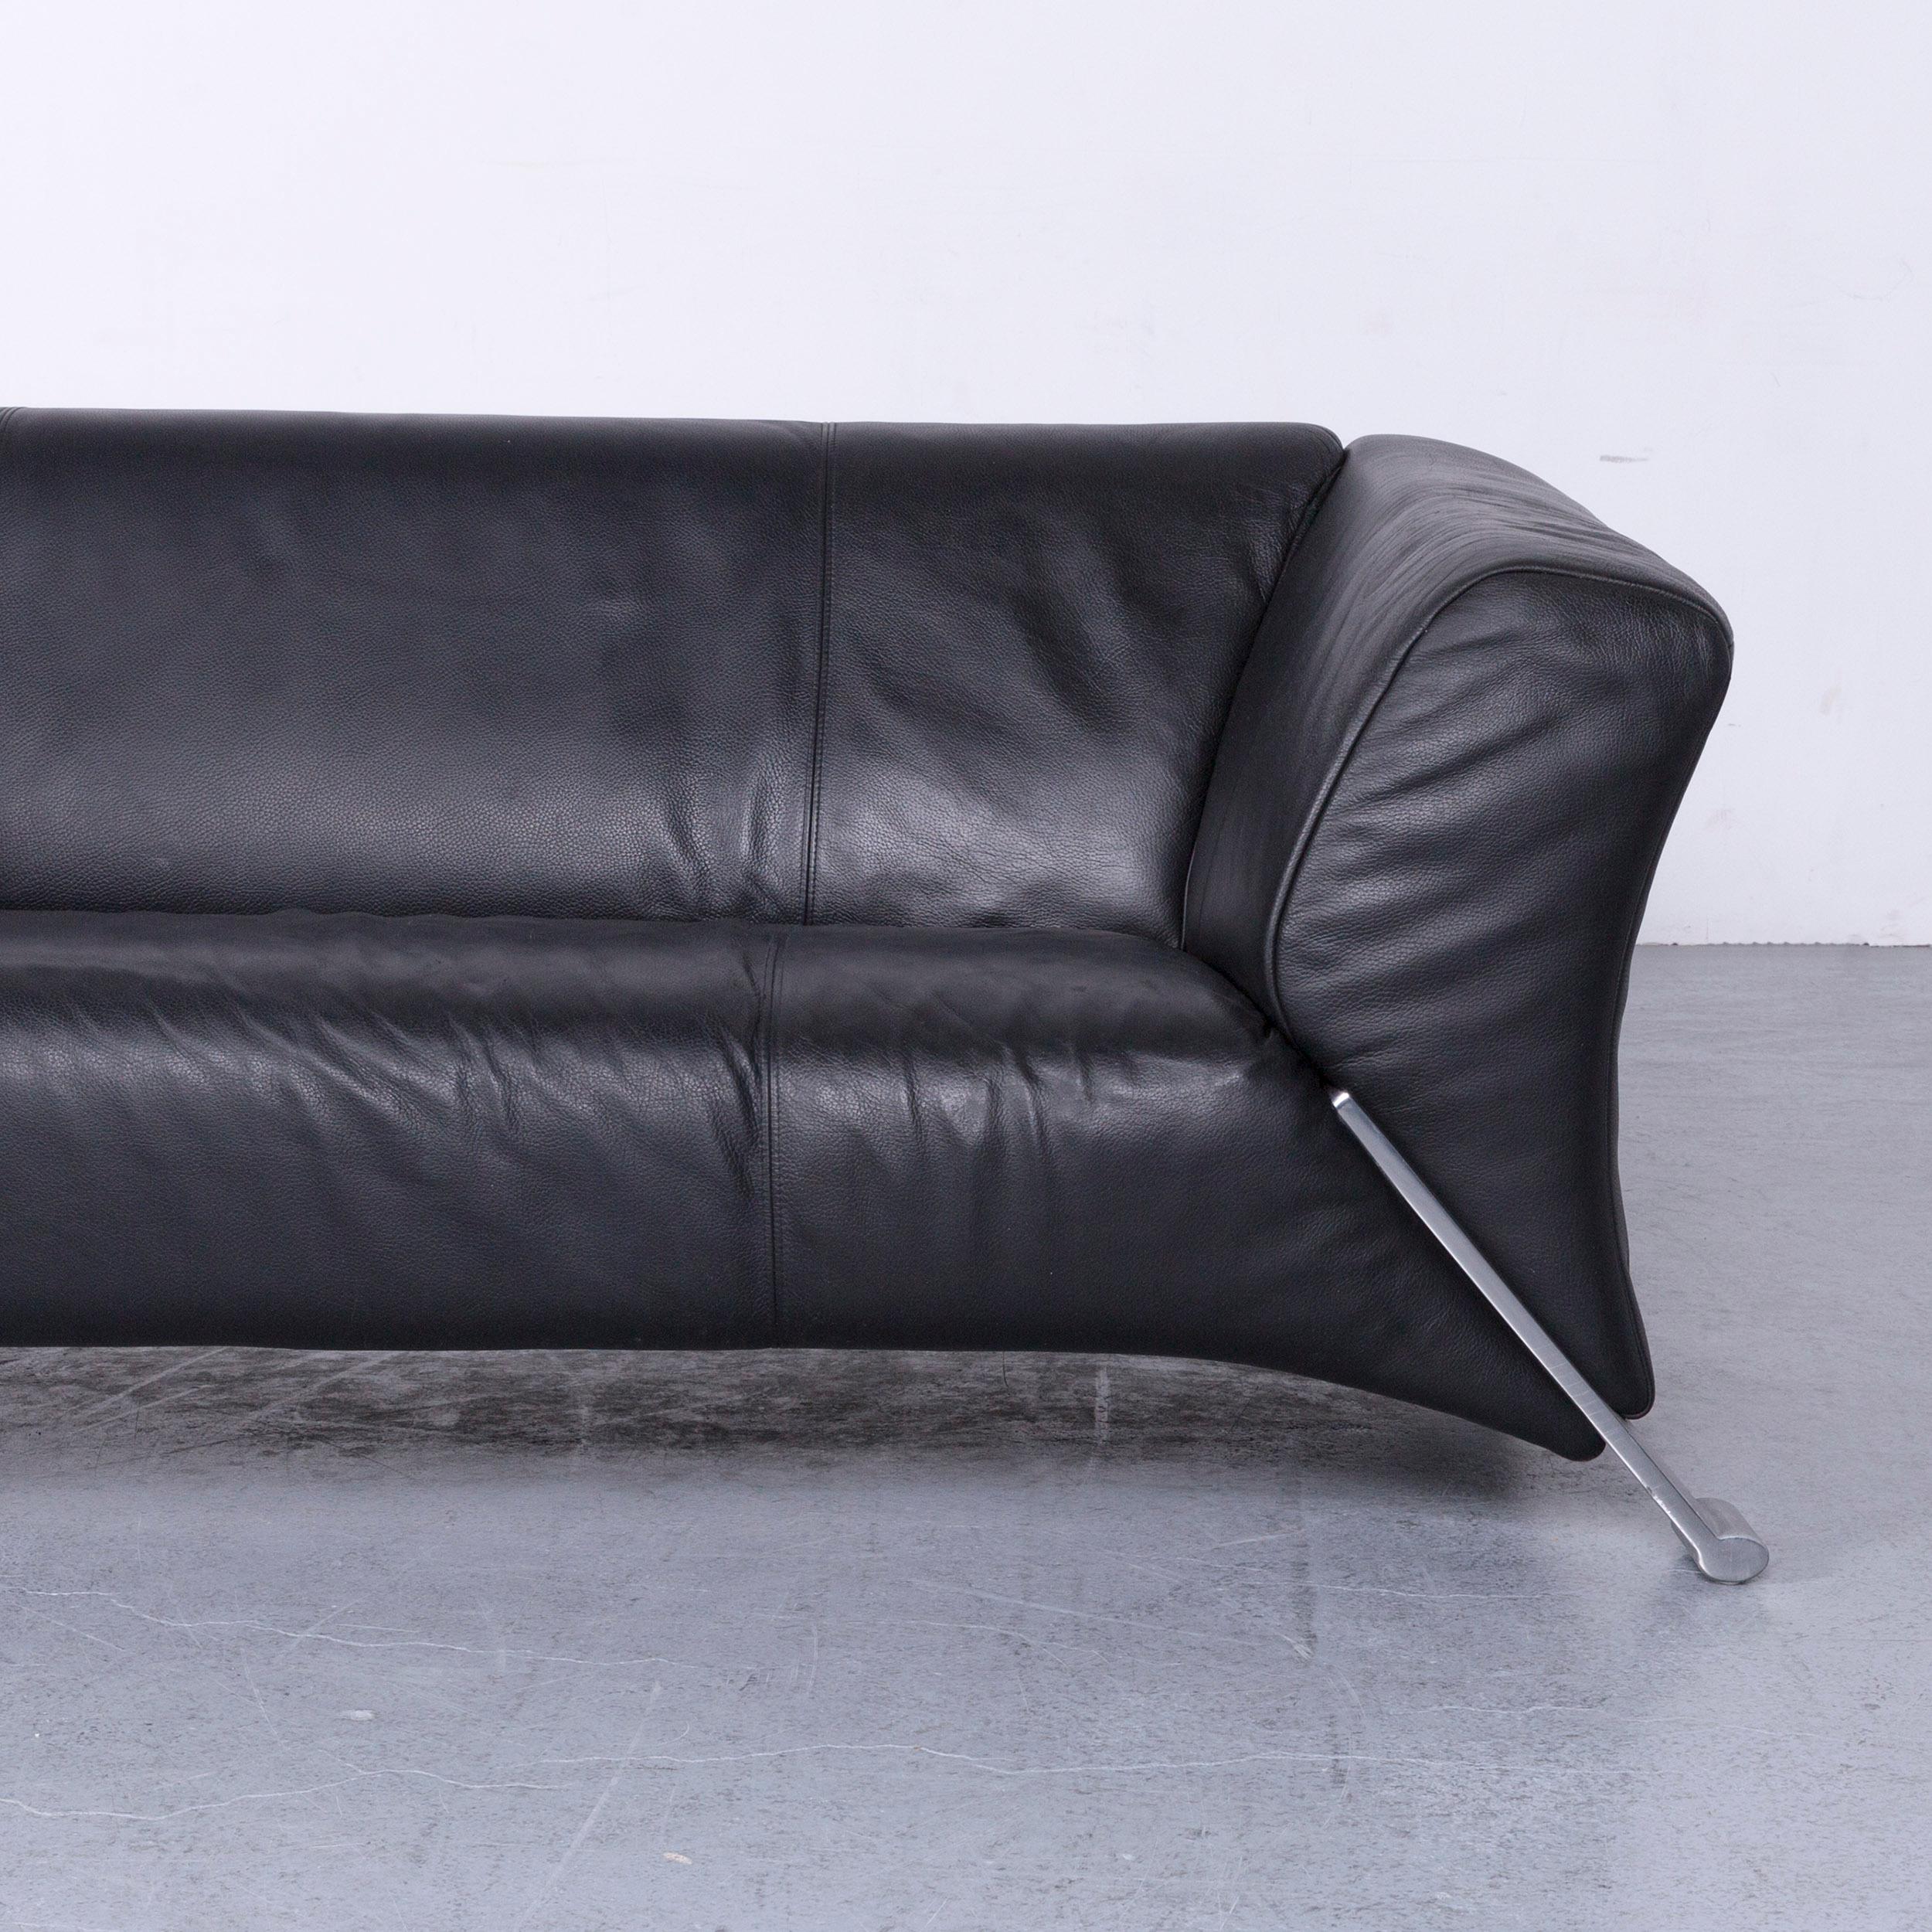 German Rolf Benz 322 Designer Sofa Black Two-Seat Leather Couch